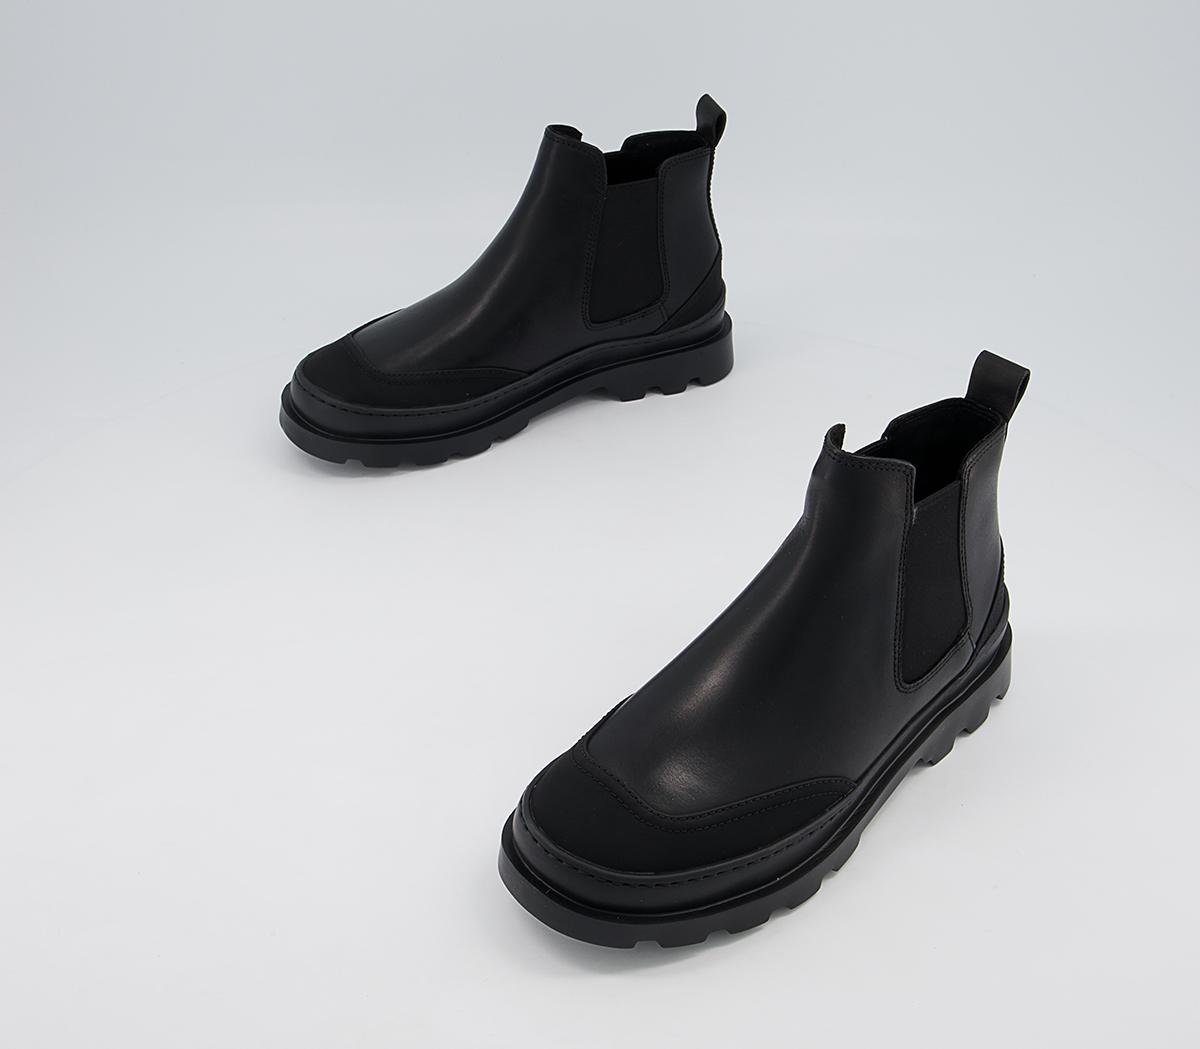 Camper Brutus Chelsea Boots Black - Women's Ankle Boots